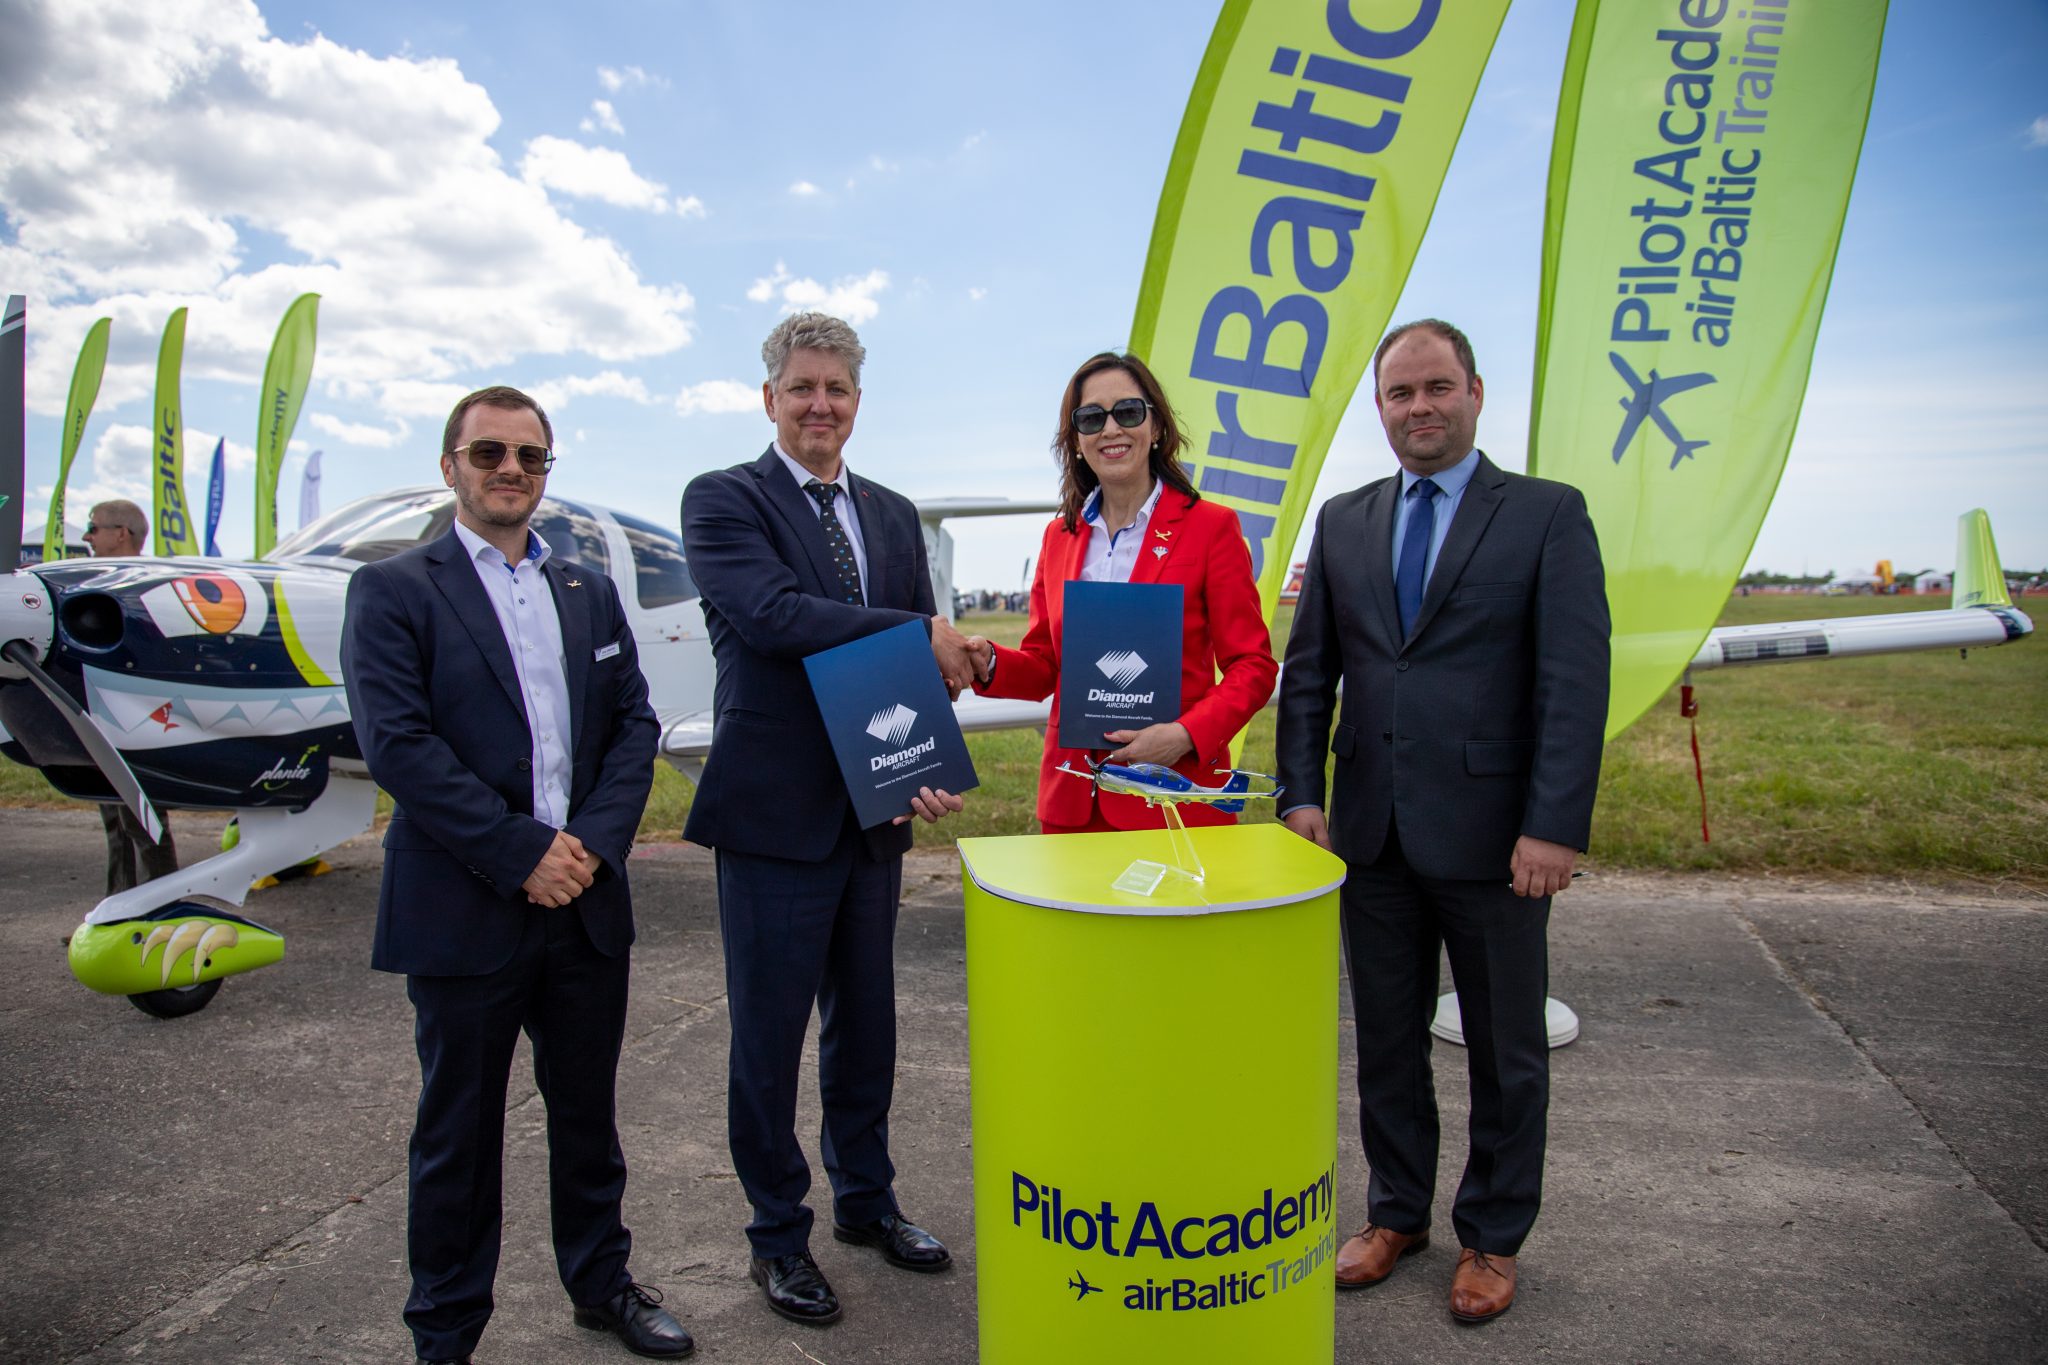 airBaltic signs LOI for three Diamond aircraft to join pilot academy